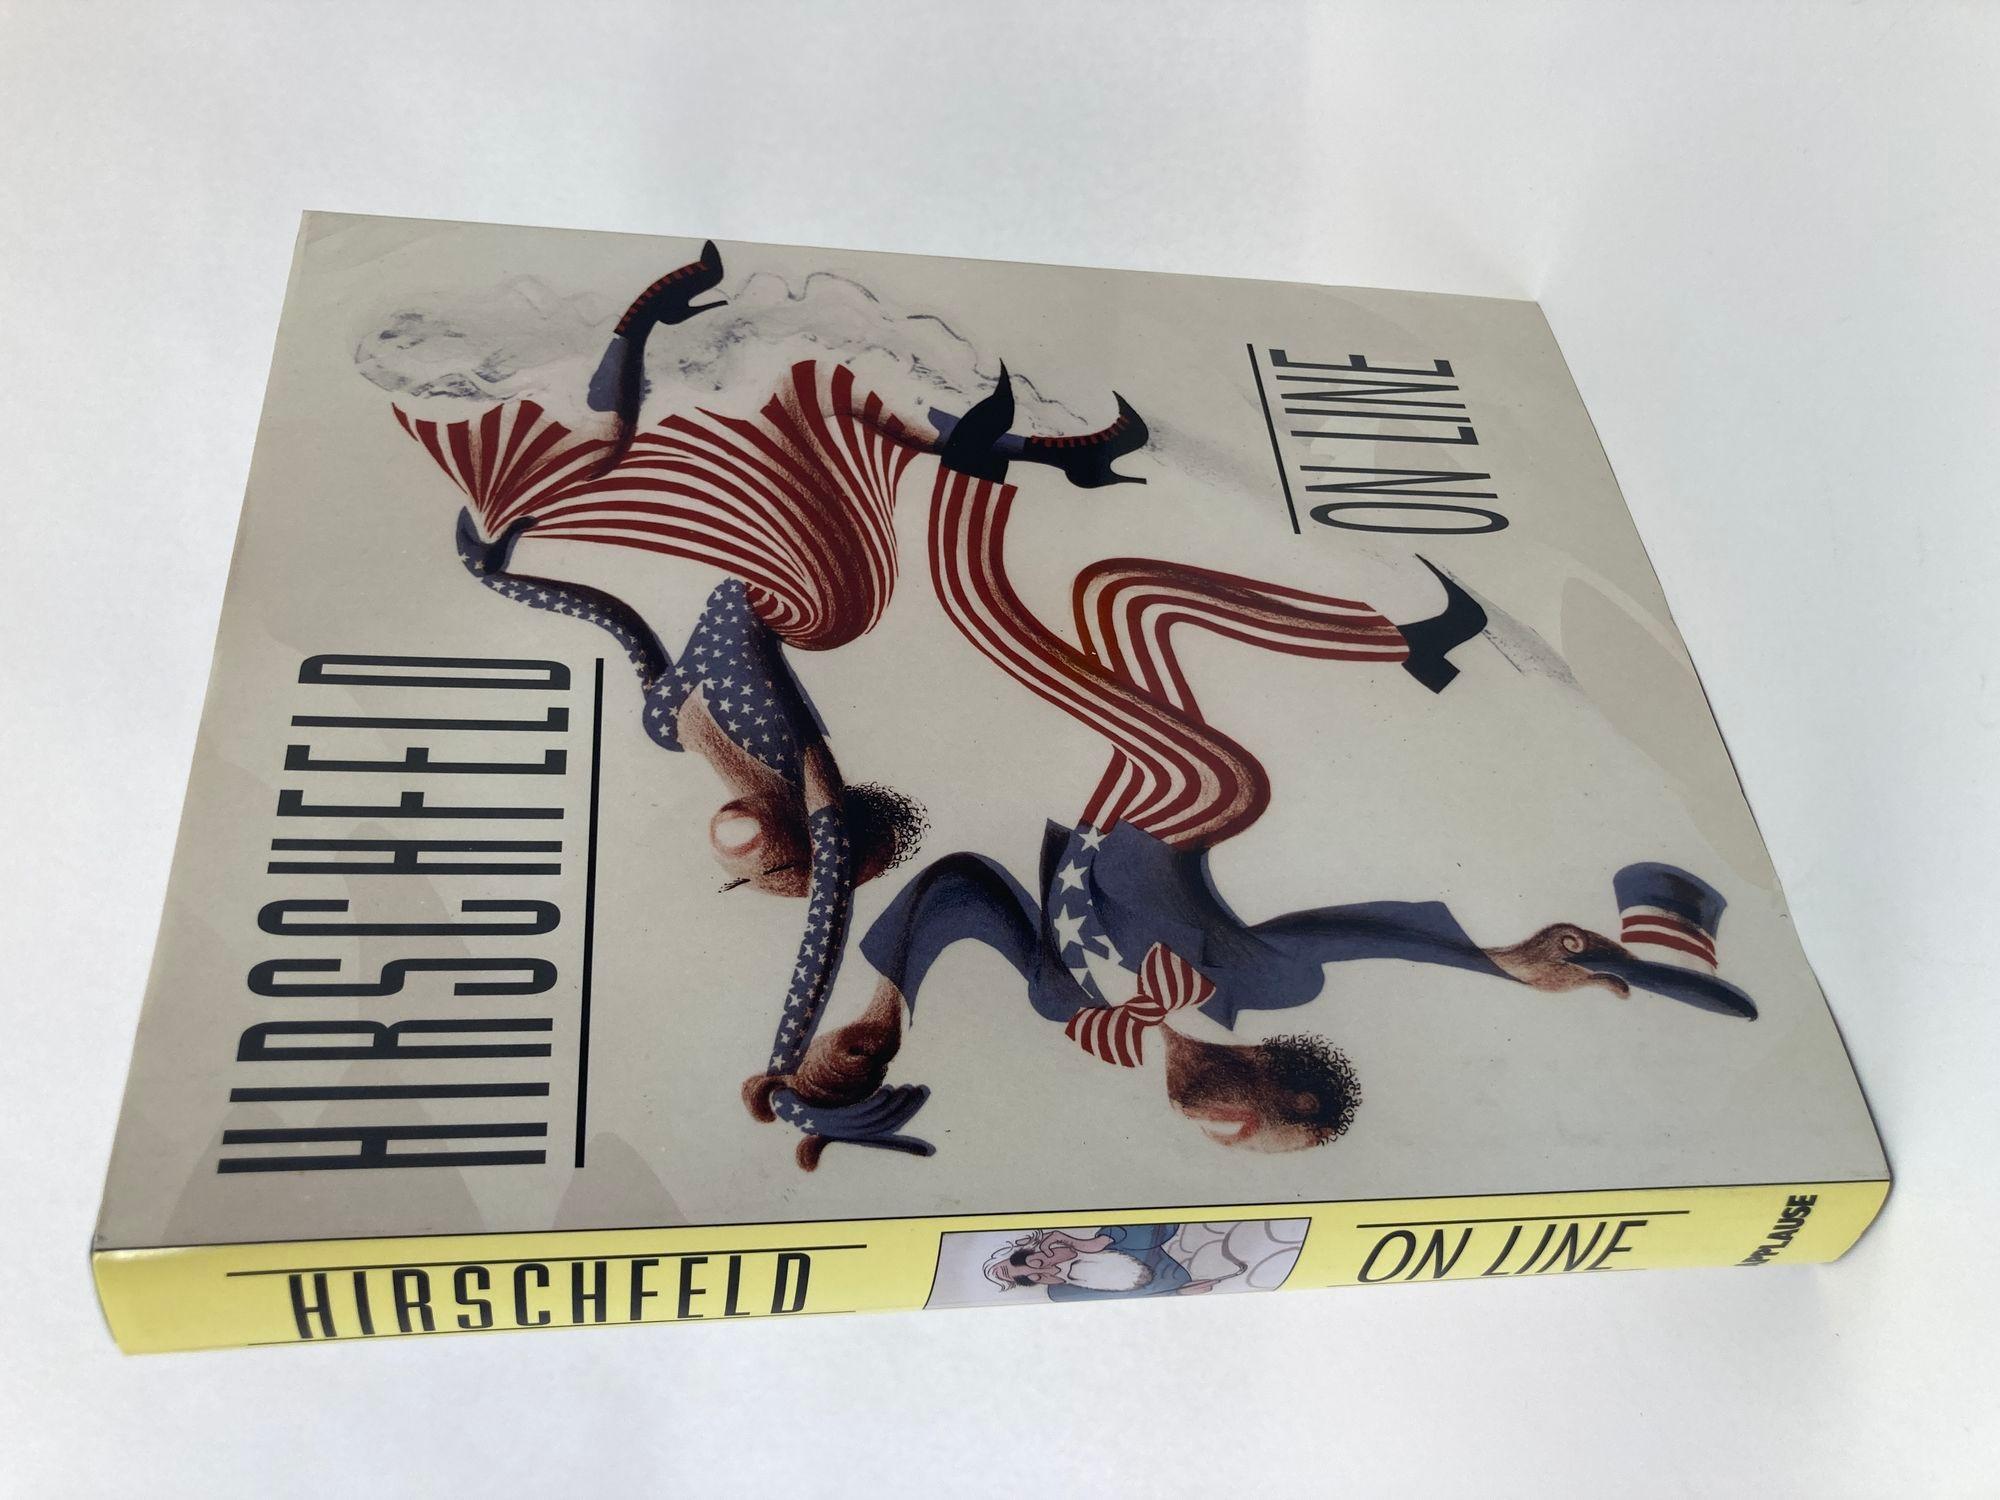 Hirschfeld On Line Hardcover Book. February 1, 2000 by Al Hirschfeld.Over 400 Hirschfeld drawings and photographs many never before collected. Includes essays by Whoopi Goldberg, Arthur Miller, Mel Gussow, Kurt Vonnegut, Grace Mirabella, Louise Kerz